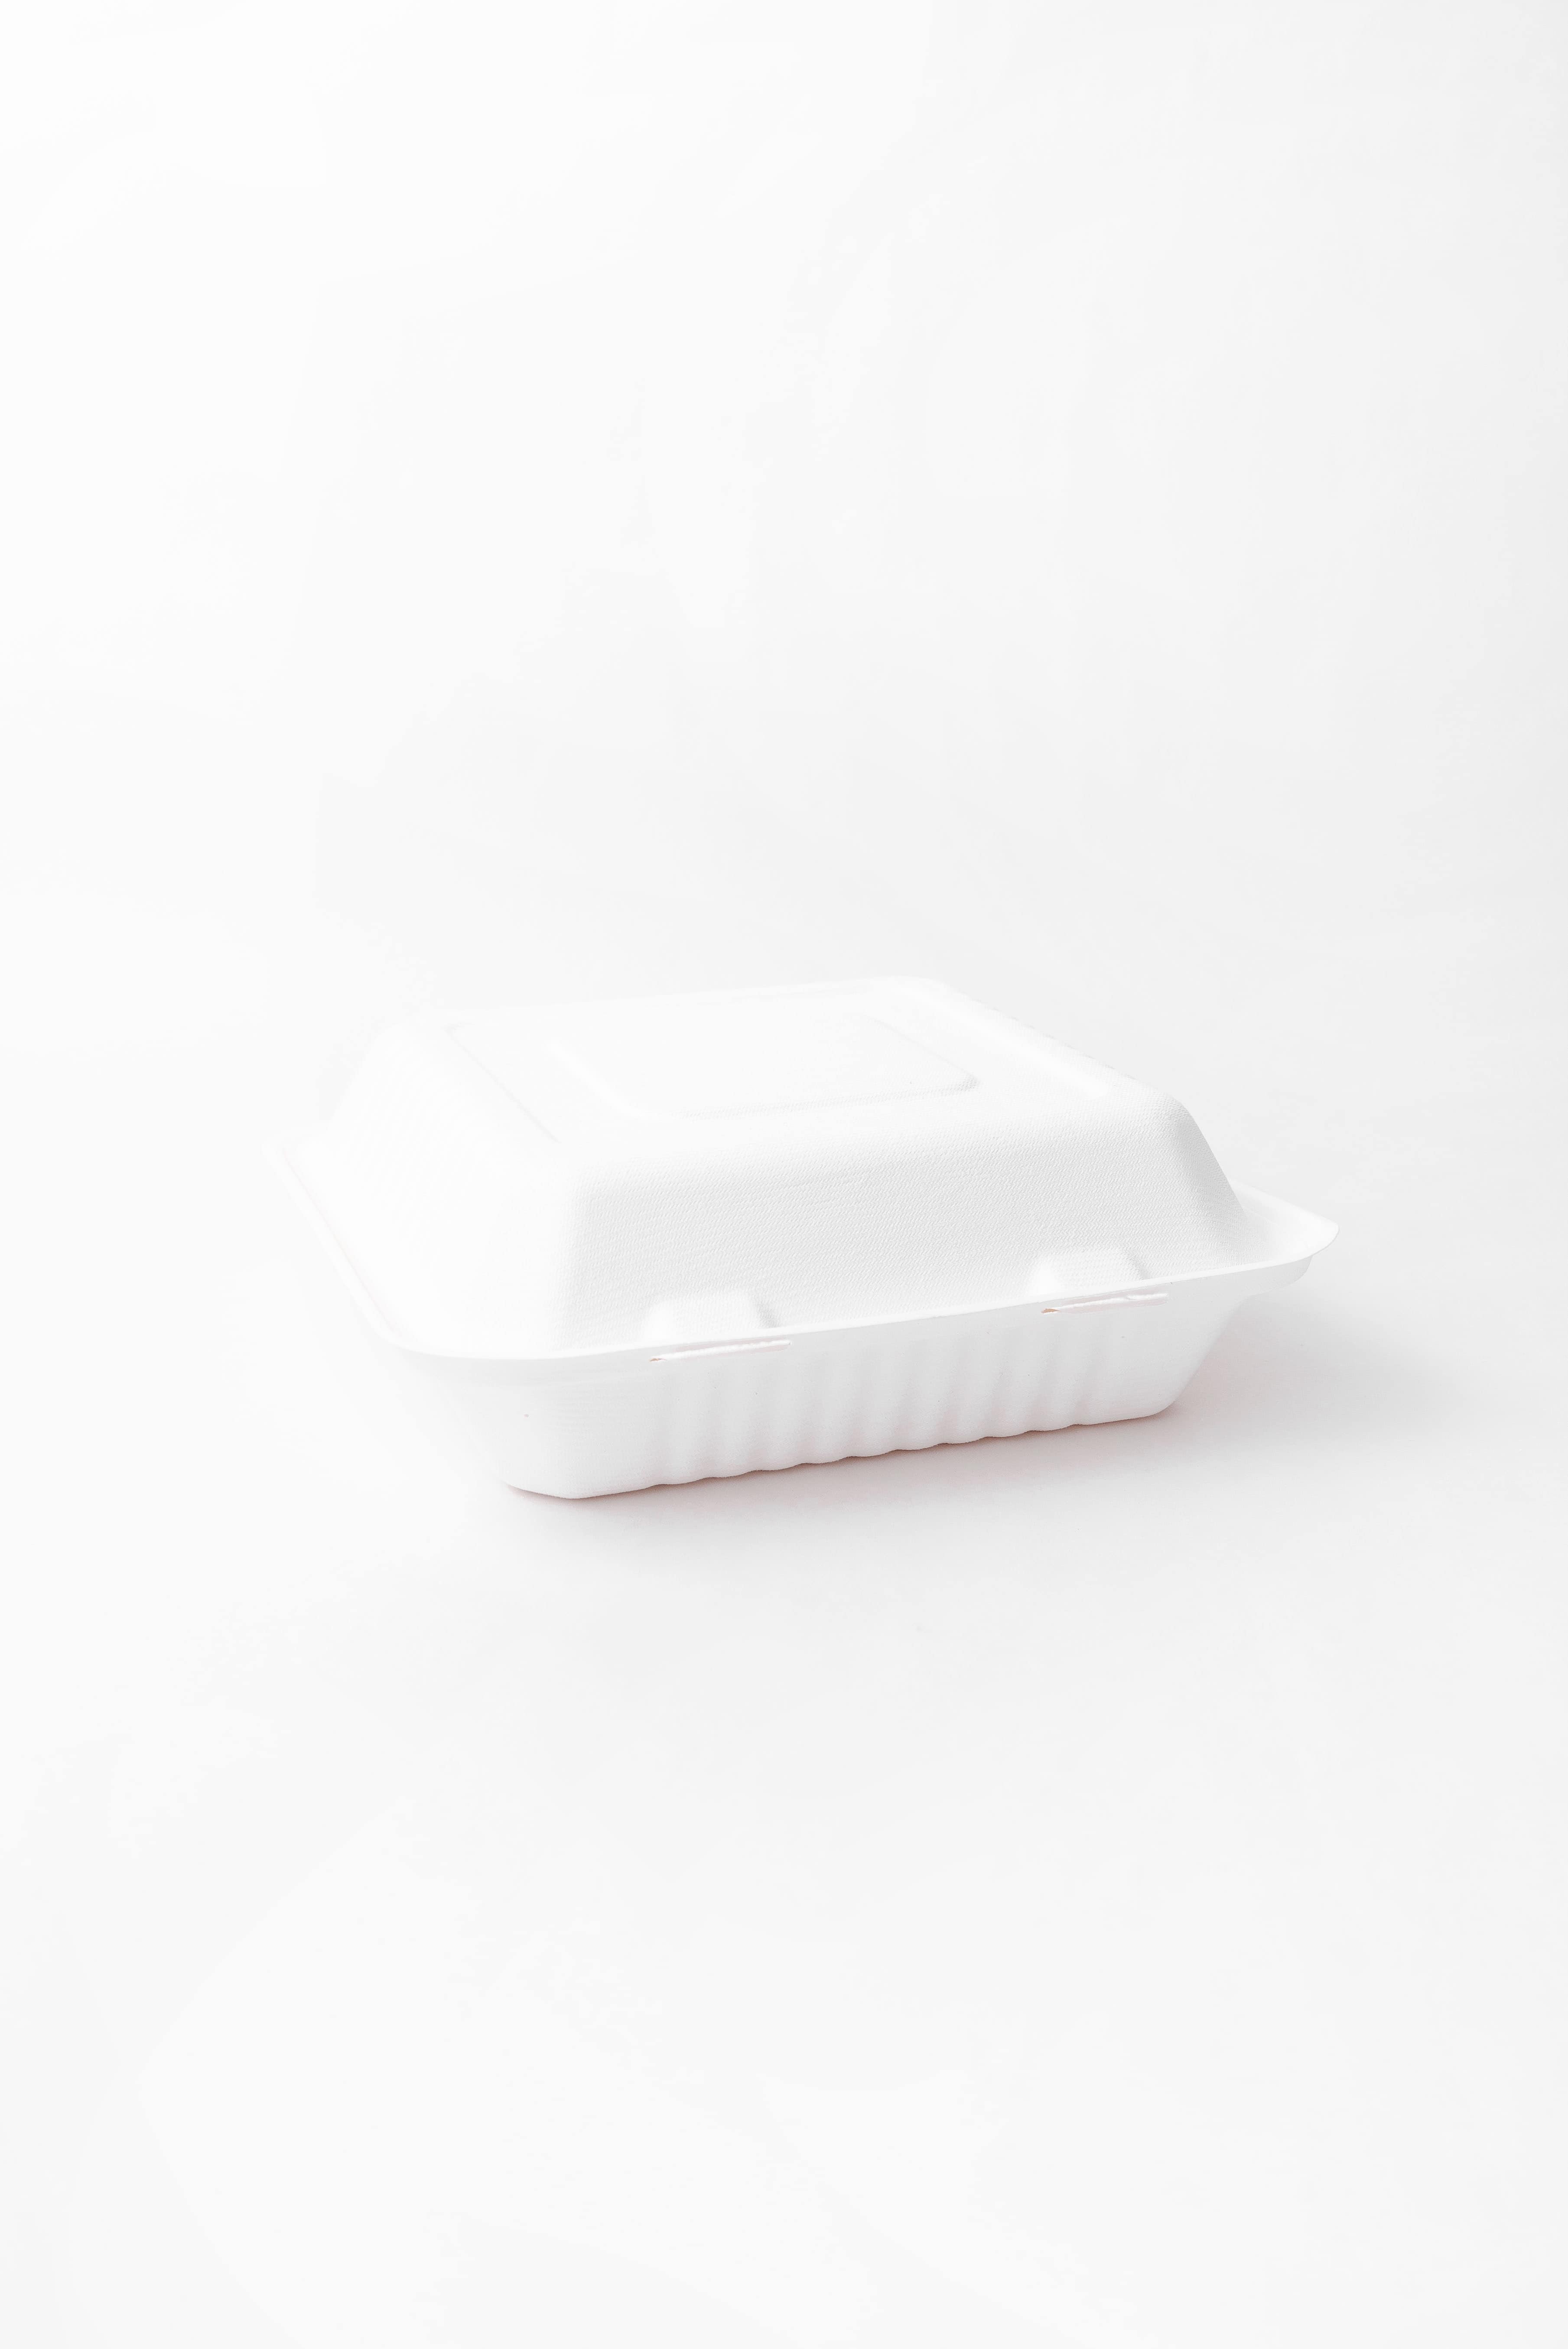 9x9 Compostable Clamshell - 200 count